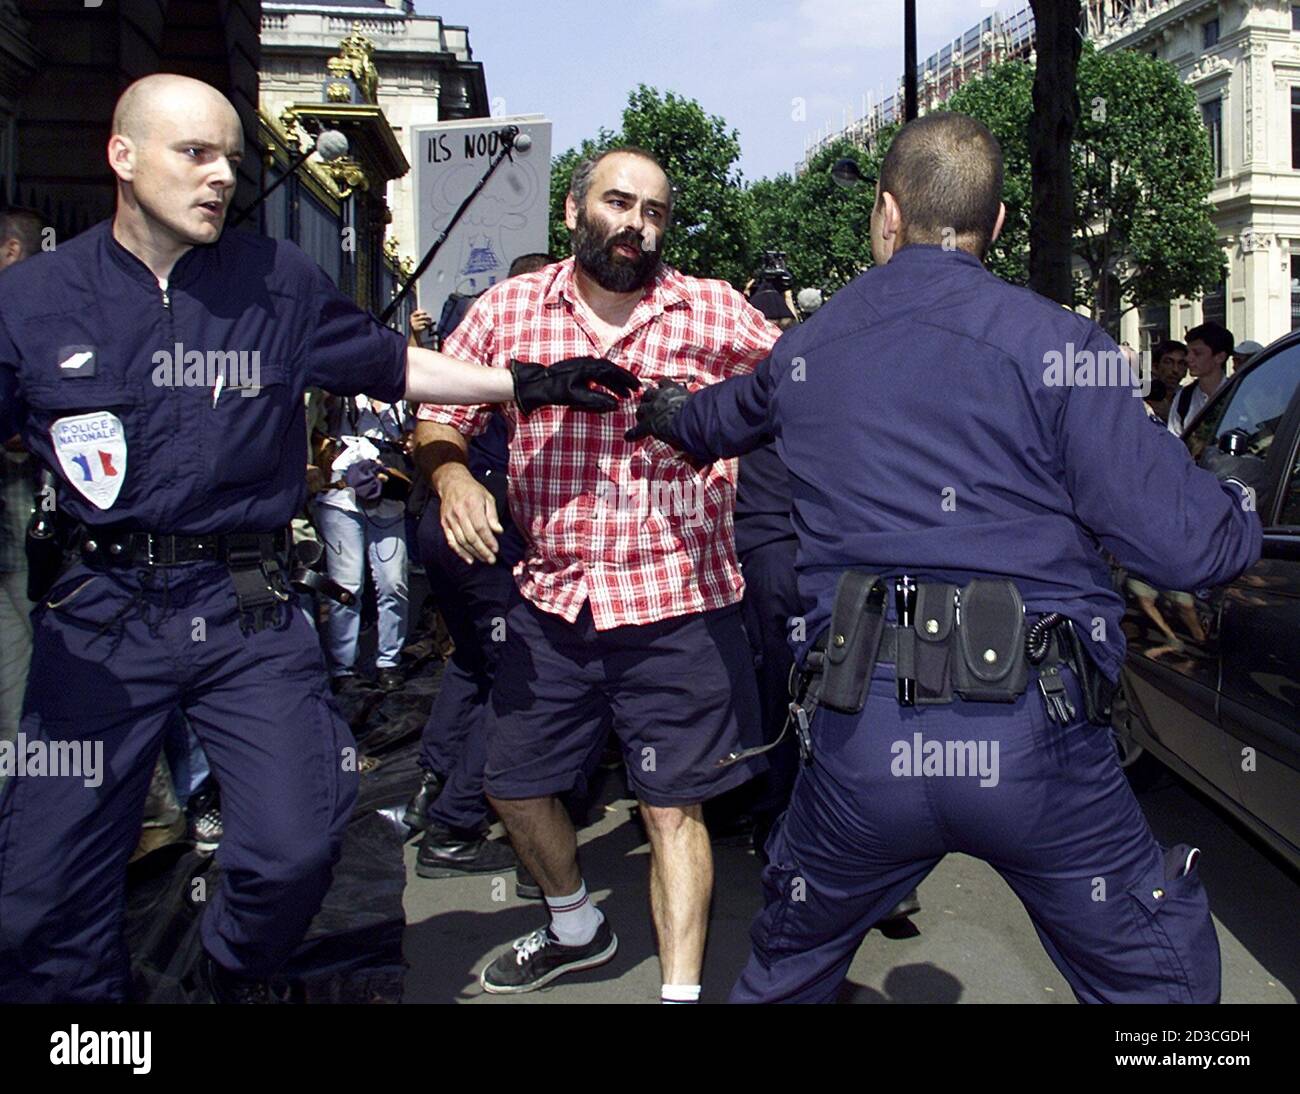 FRENCH CONFEDERATION PAYSANNE MEMBER SCUFFLES WITH FRENCH PARAMILITARY POLICE IN FRONT OF COURTHOUSE IN PARIS.   French law requires that the faces of police and gendarmes are masked in publications within France. Stock Photo